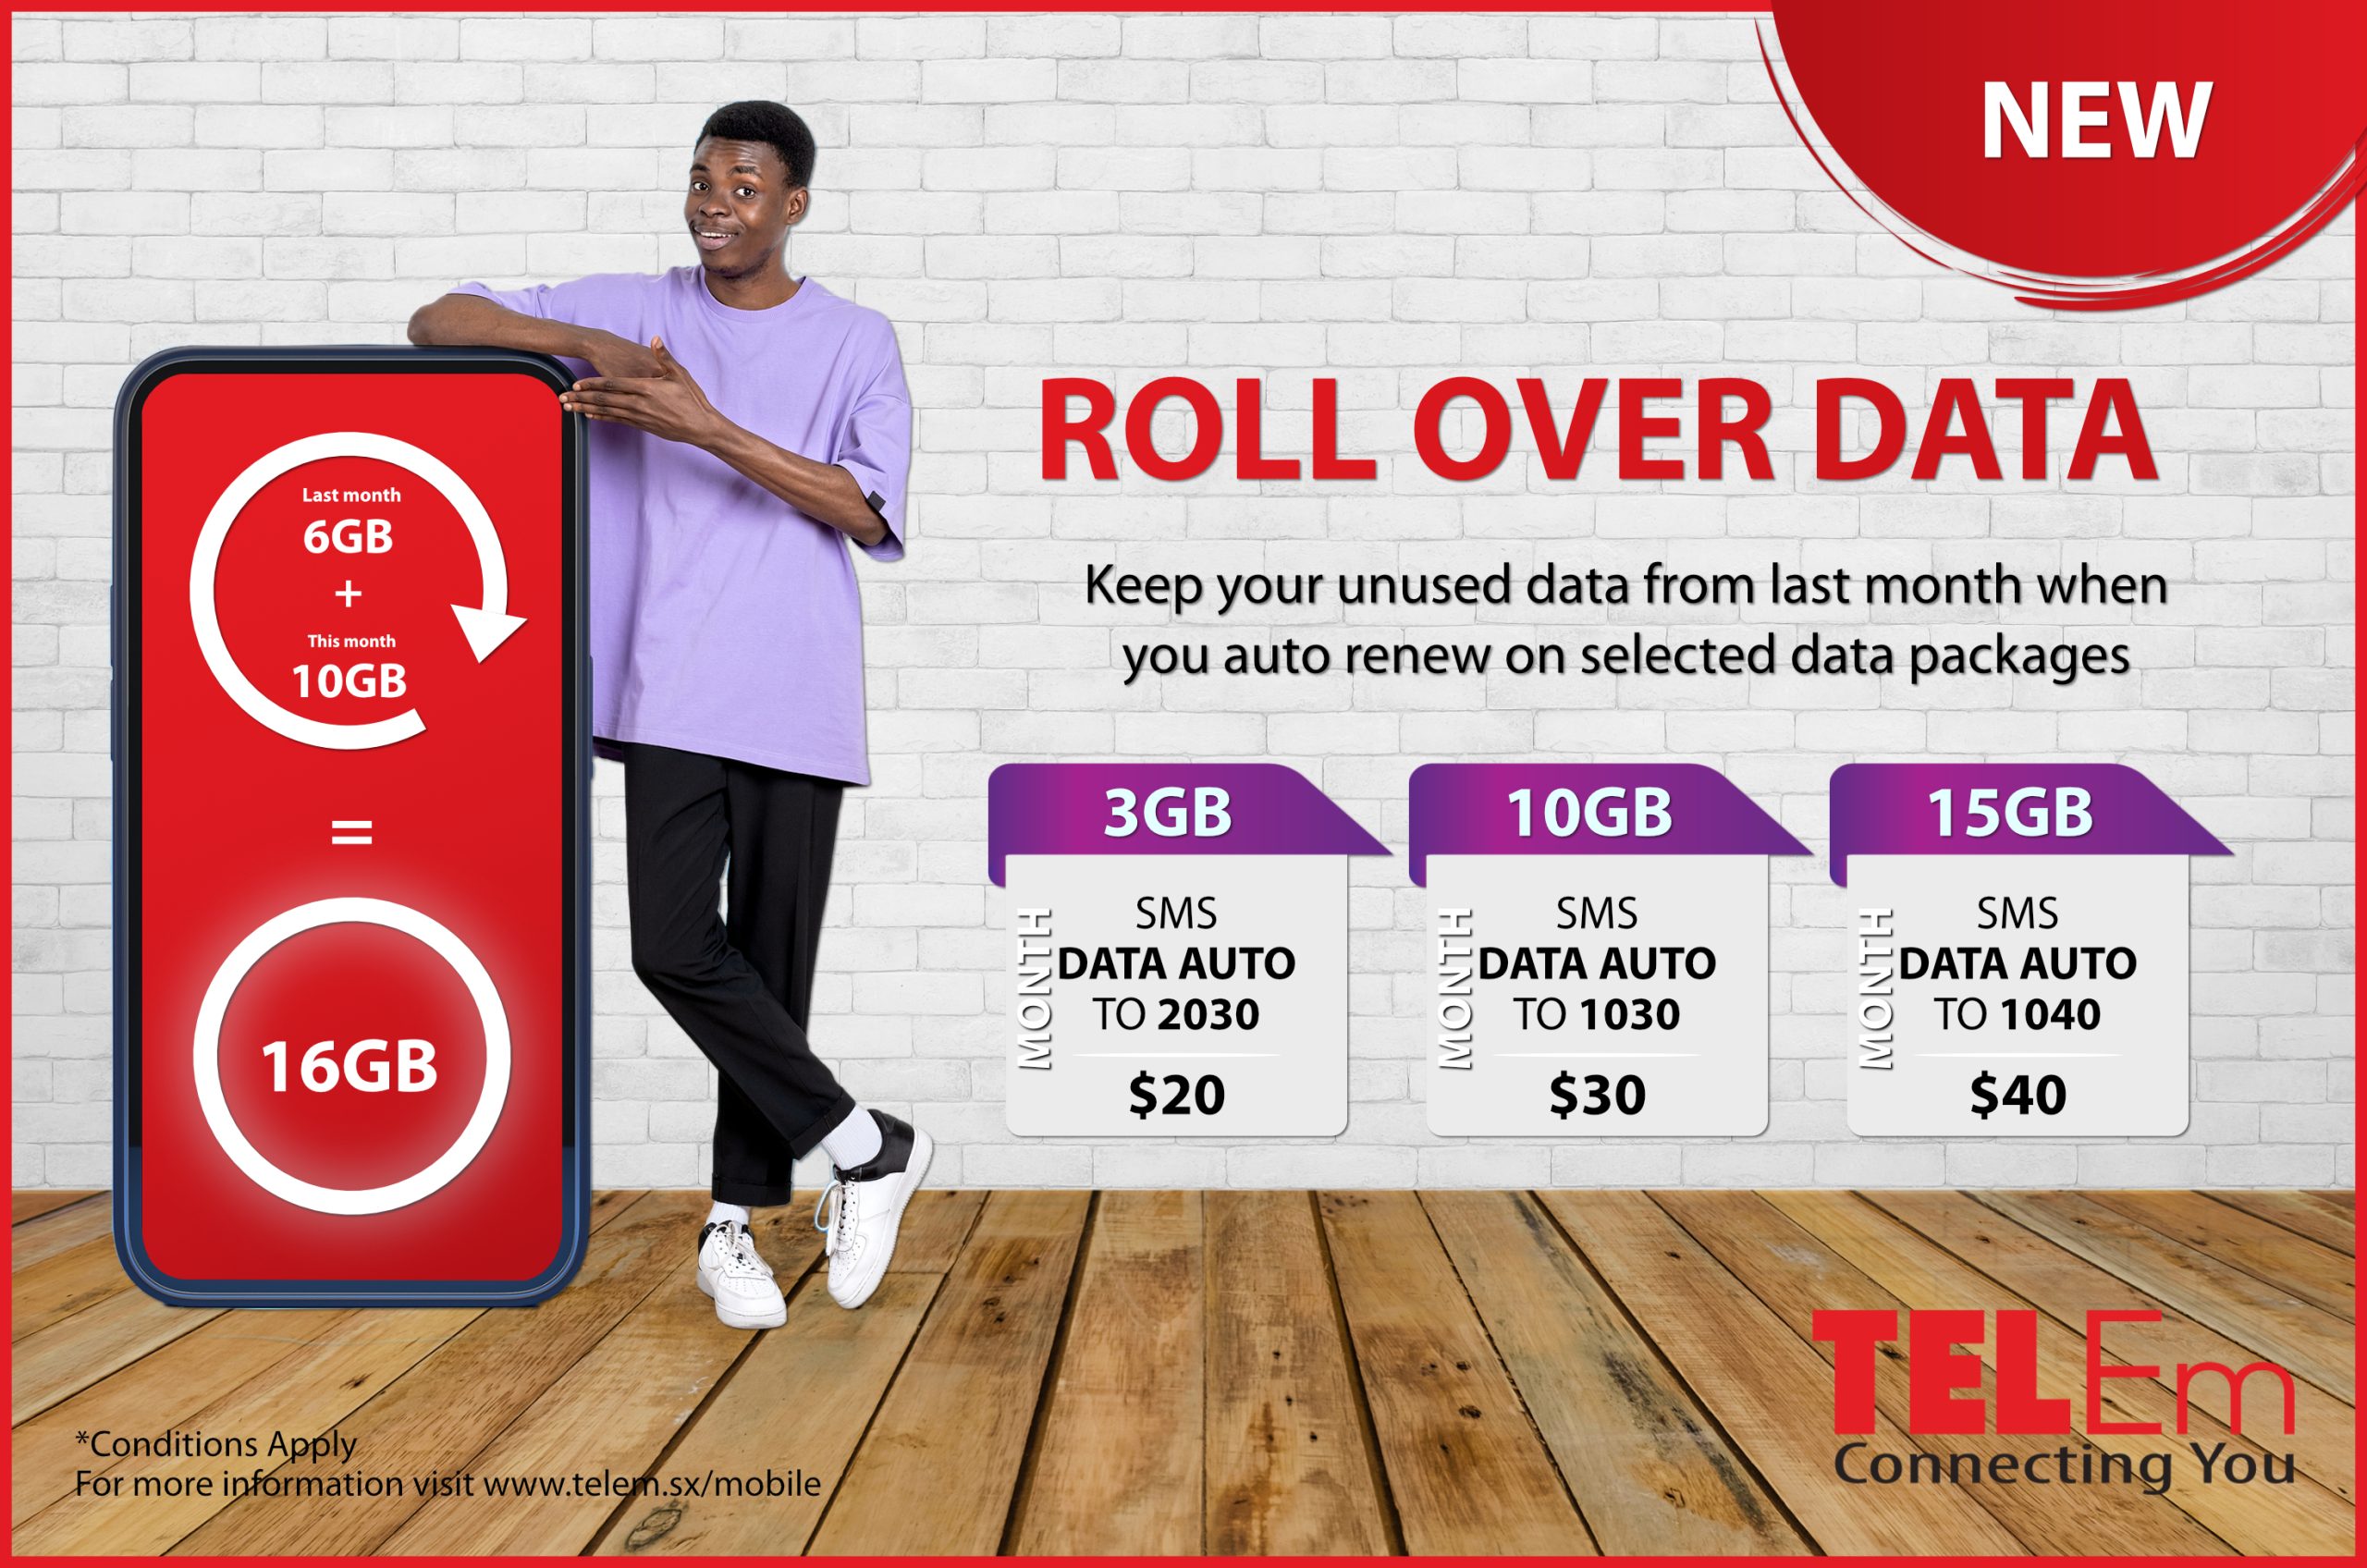 Auto Renew Roll Over Data on selected Packages